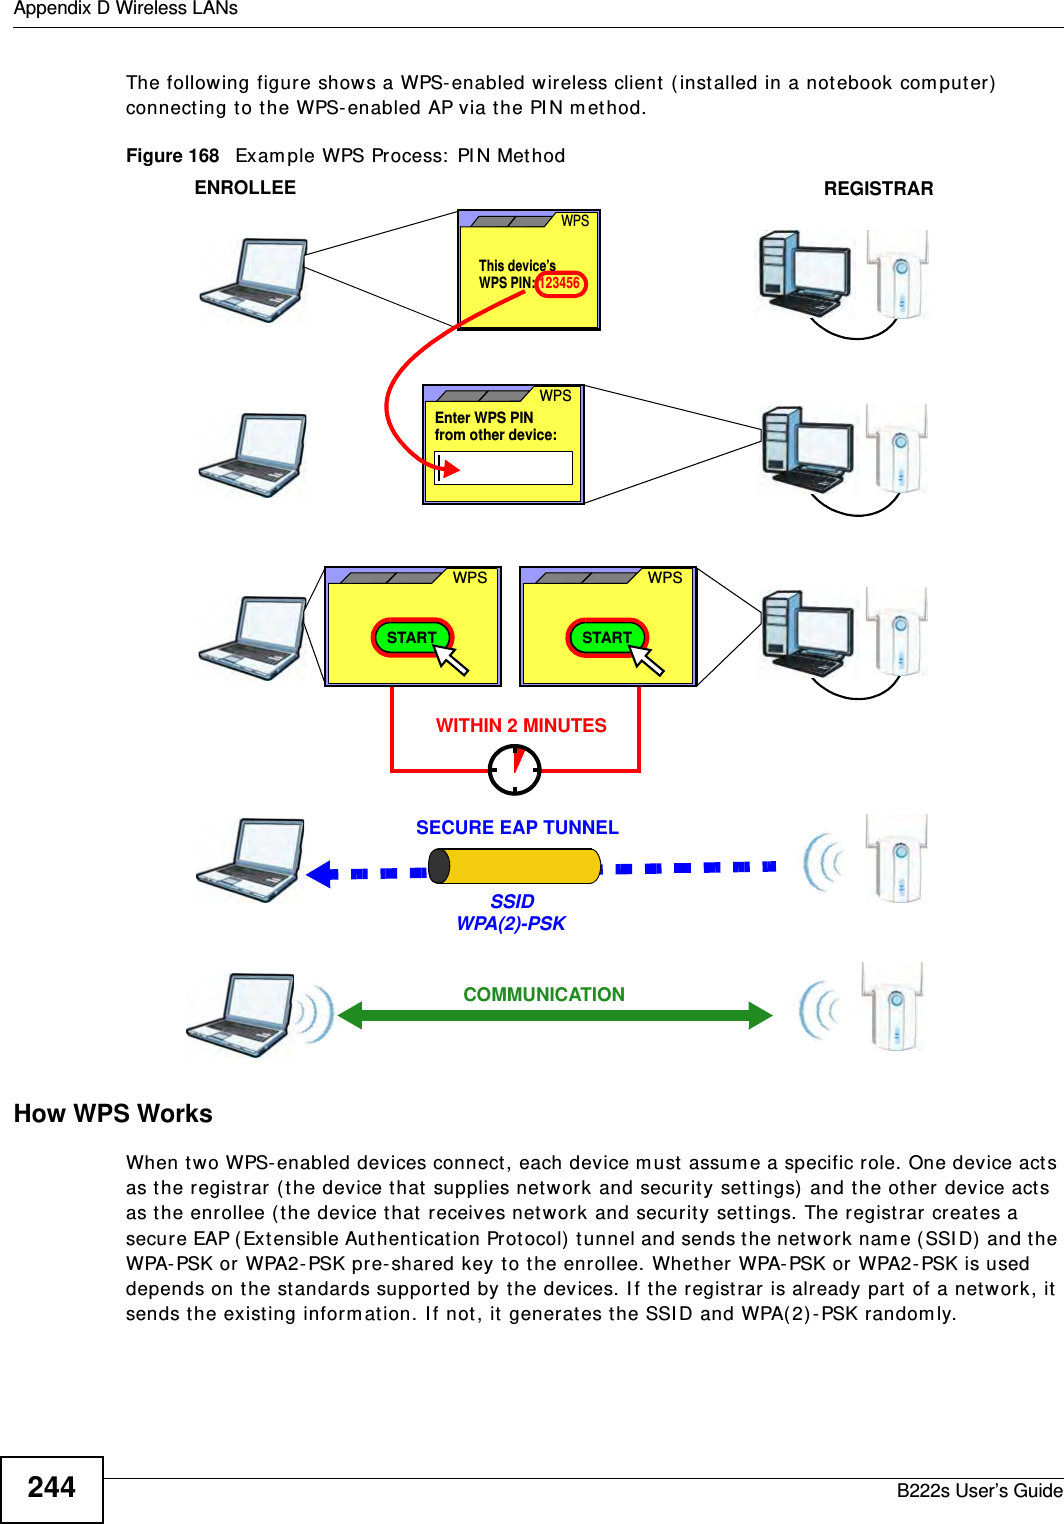 Appendix D Wireless LANsB222s User’s Guide244The following figure shows a WPS- enabled wireless client  ( installed in a not ebook com puter)  connecting to t he WPS-enabled AP via t he PI N m ethod.Figure 168   Exam ple WPS Process:  PI N Met hodHow WPS WorksWhen two WPS- enabled devices connect , each device m ust assum e a specific role. One device acts as t he registrar ( the device t hat  supplies net w ork and securit y  settings) and t he ot her device acts as t he enrollee ( the device t hat  receives net w ork and securit y  set tings. The registrar creat es a secure EAP ( Ext ensible Aut hent icat ion Prot ocol)  t unnel and sends t he net work nam e ( SSI D) and t he WPA- PSK or WPA2- PSK pre- shared key to t he enrollee. Whet her WPA-PSK or WPA2- PSK is used depends on t he standards support ed by t he devices. I f the registrar is already part  of a net w ork, it  sends t he existing inform ation. I f not , it  generat es the SSI D and WPA( 2) -PSK random ly.ENROLLEESECURE EAP TUNNELSSIDWPA(2)-PSKWITHIN 2 MINUTESCOMMUNICATIONThis device’s WPSEnter WPS PIN  WPSfrom other device: WPS PIN: 123456WPSSTARTWPSSTARTREGISTRAR